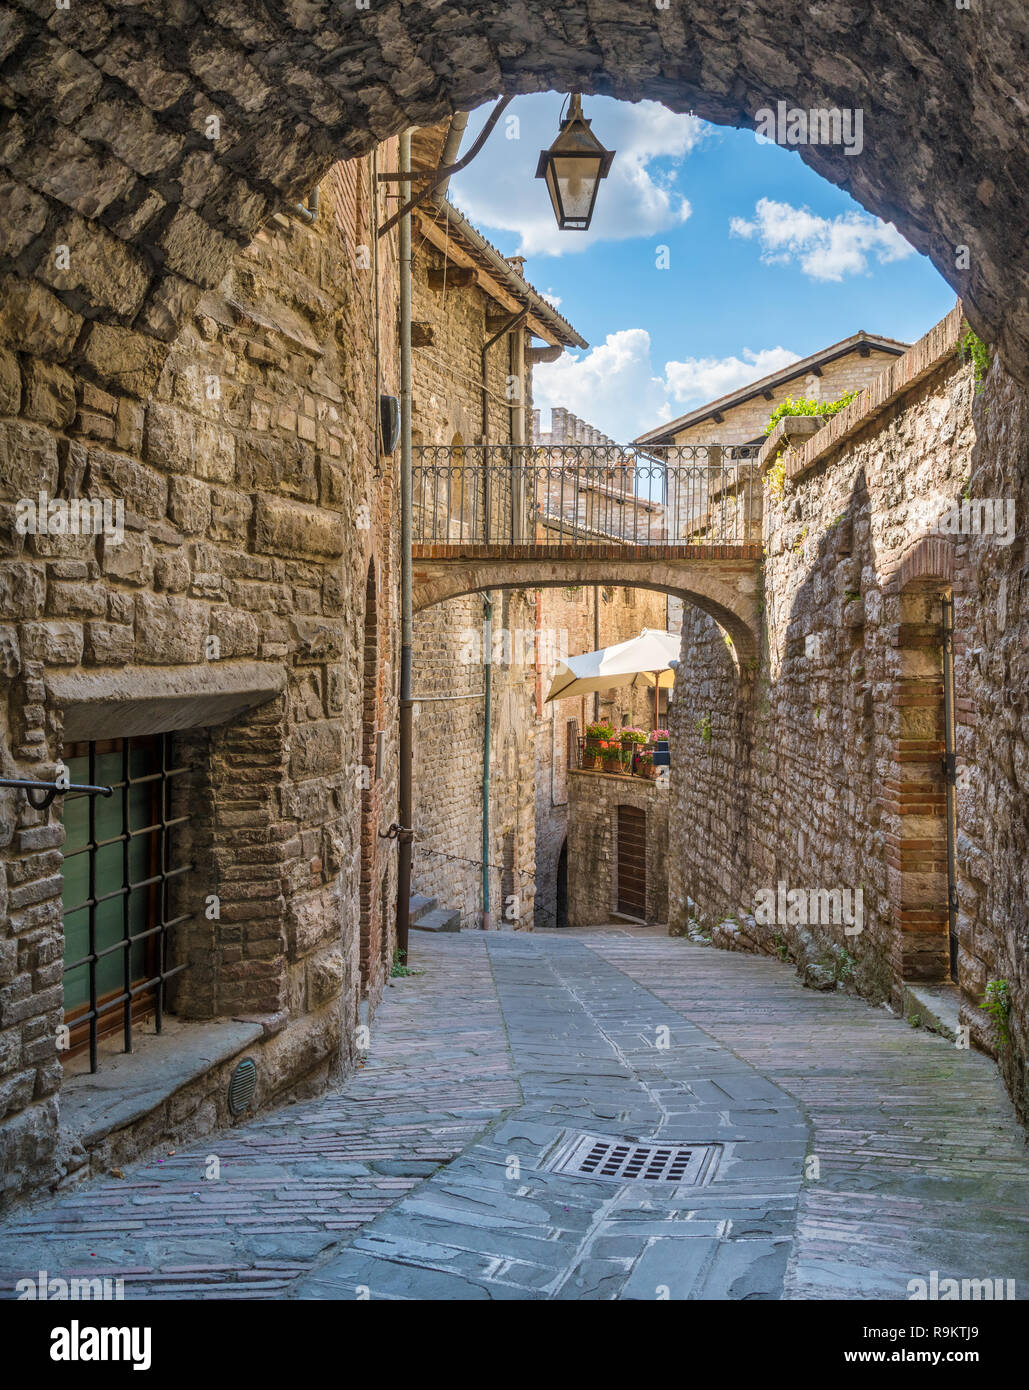 Scenic sight in Gubbio, medieval town in the Province of Perugia, Umbria, central Italy. Stock Photo